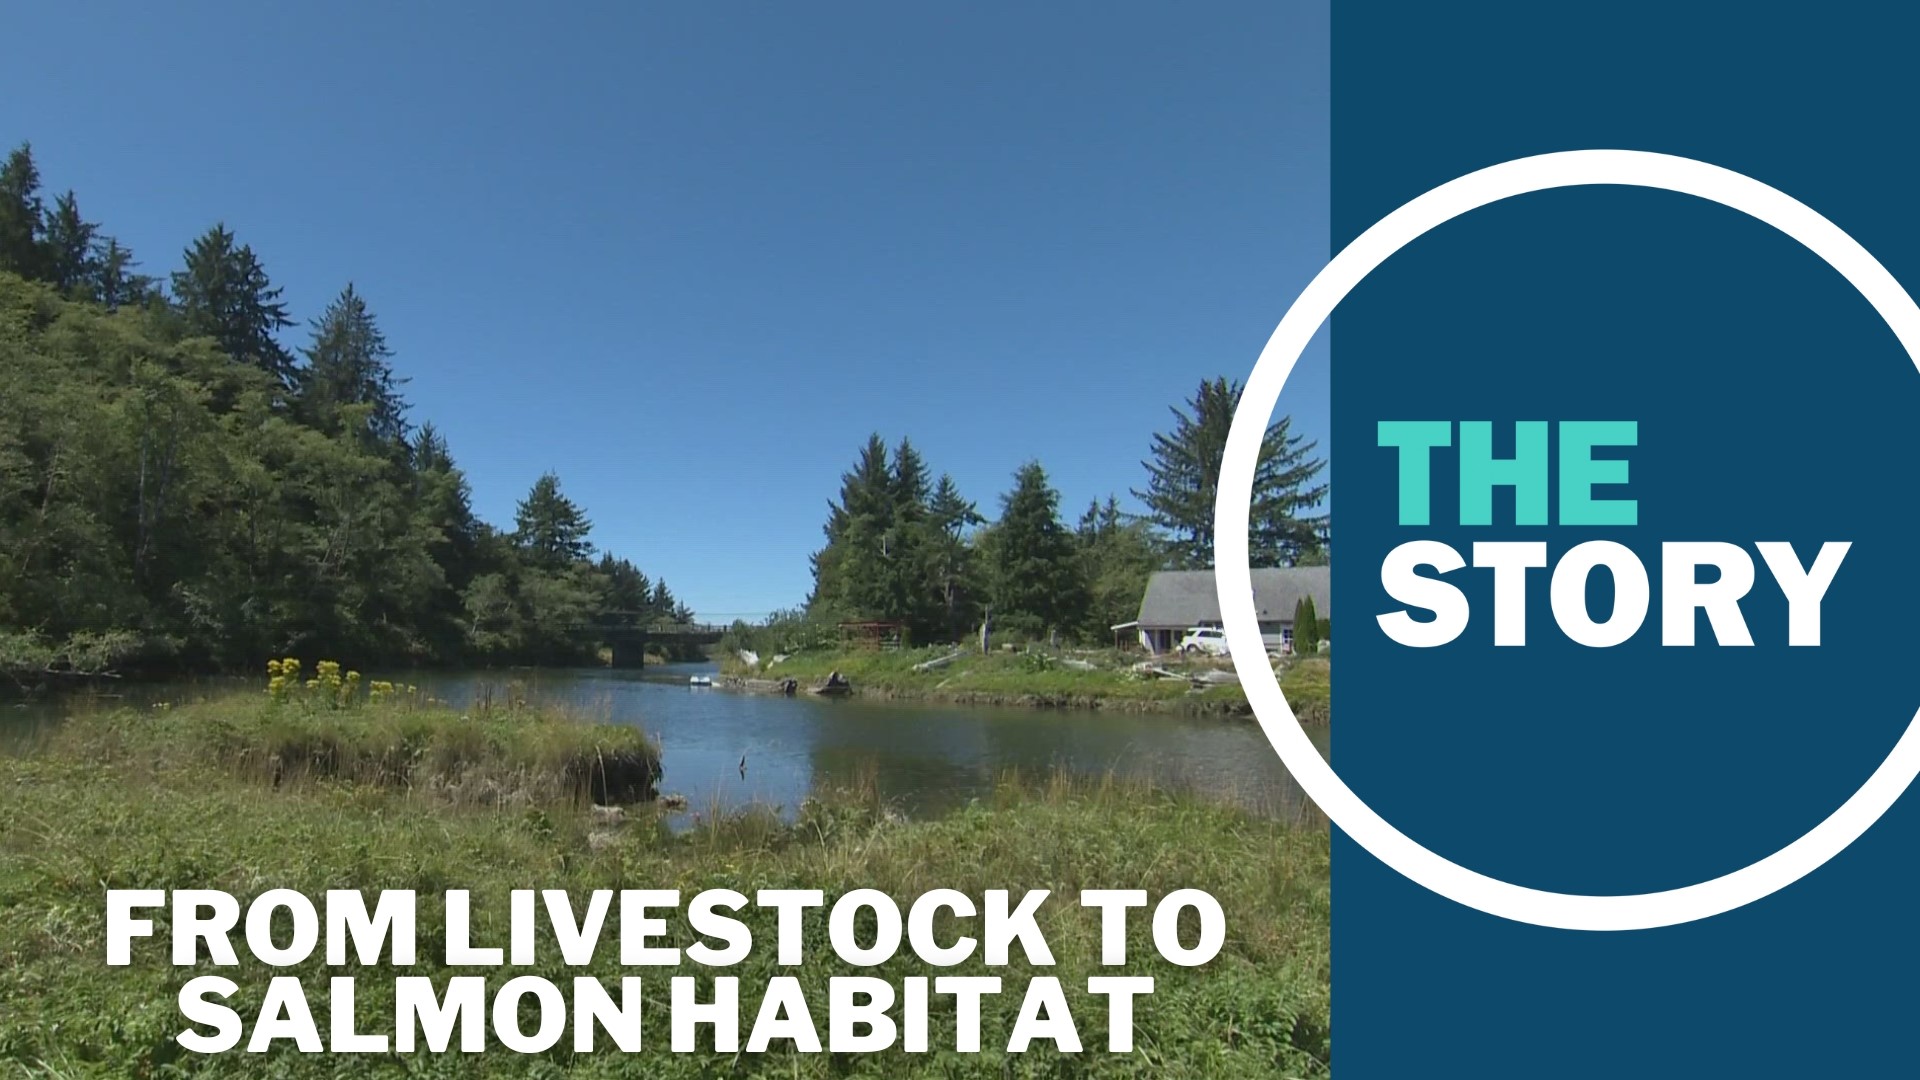 Habitat restoration on the Oregon Coast will be good for struggling coho salmon, but it will have benefits for other wildlife and people, too.